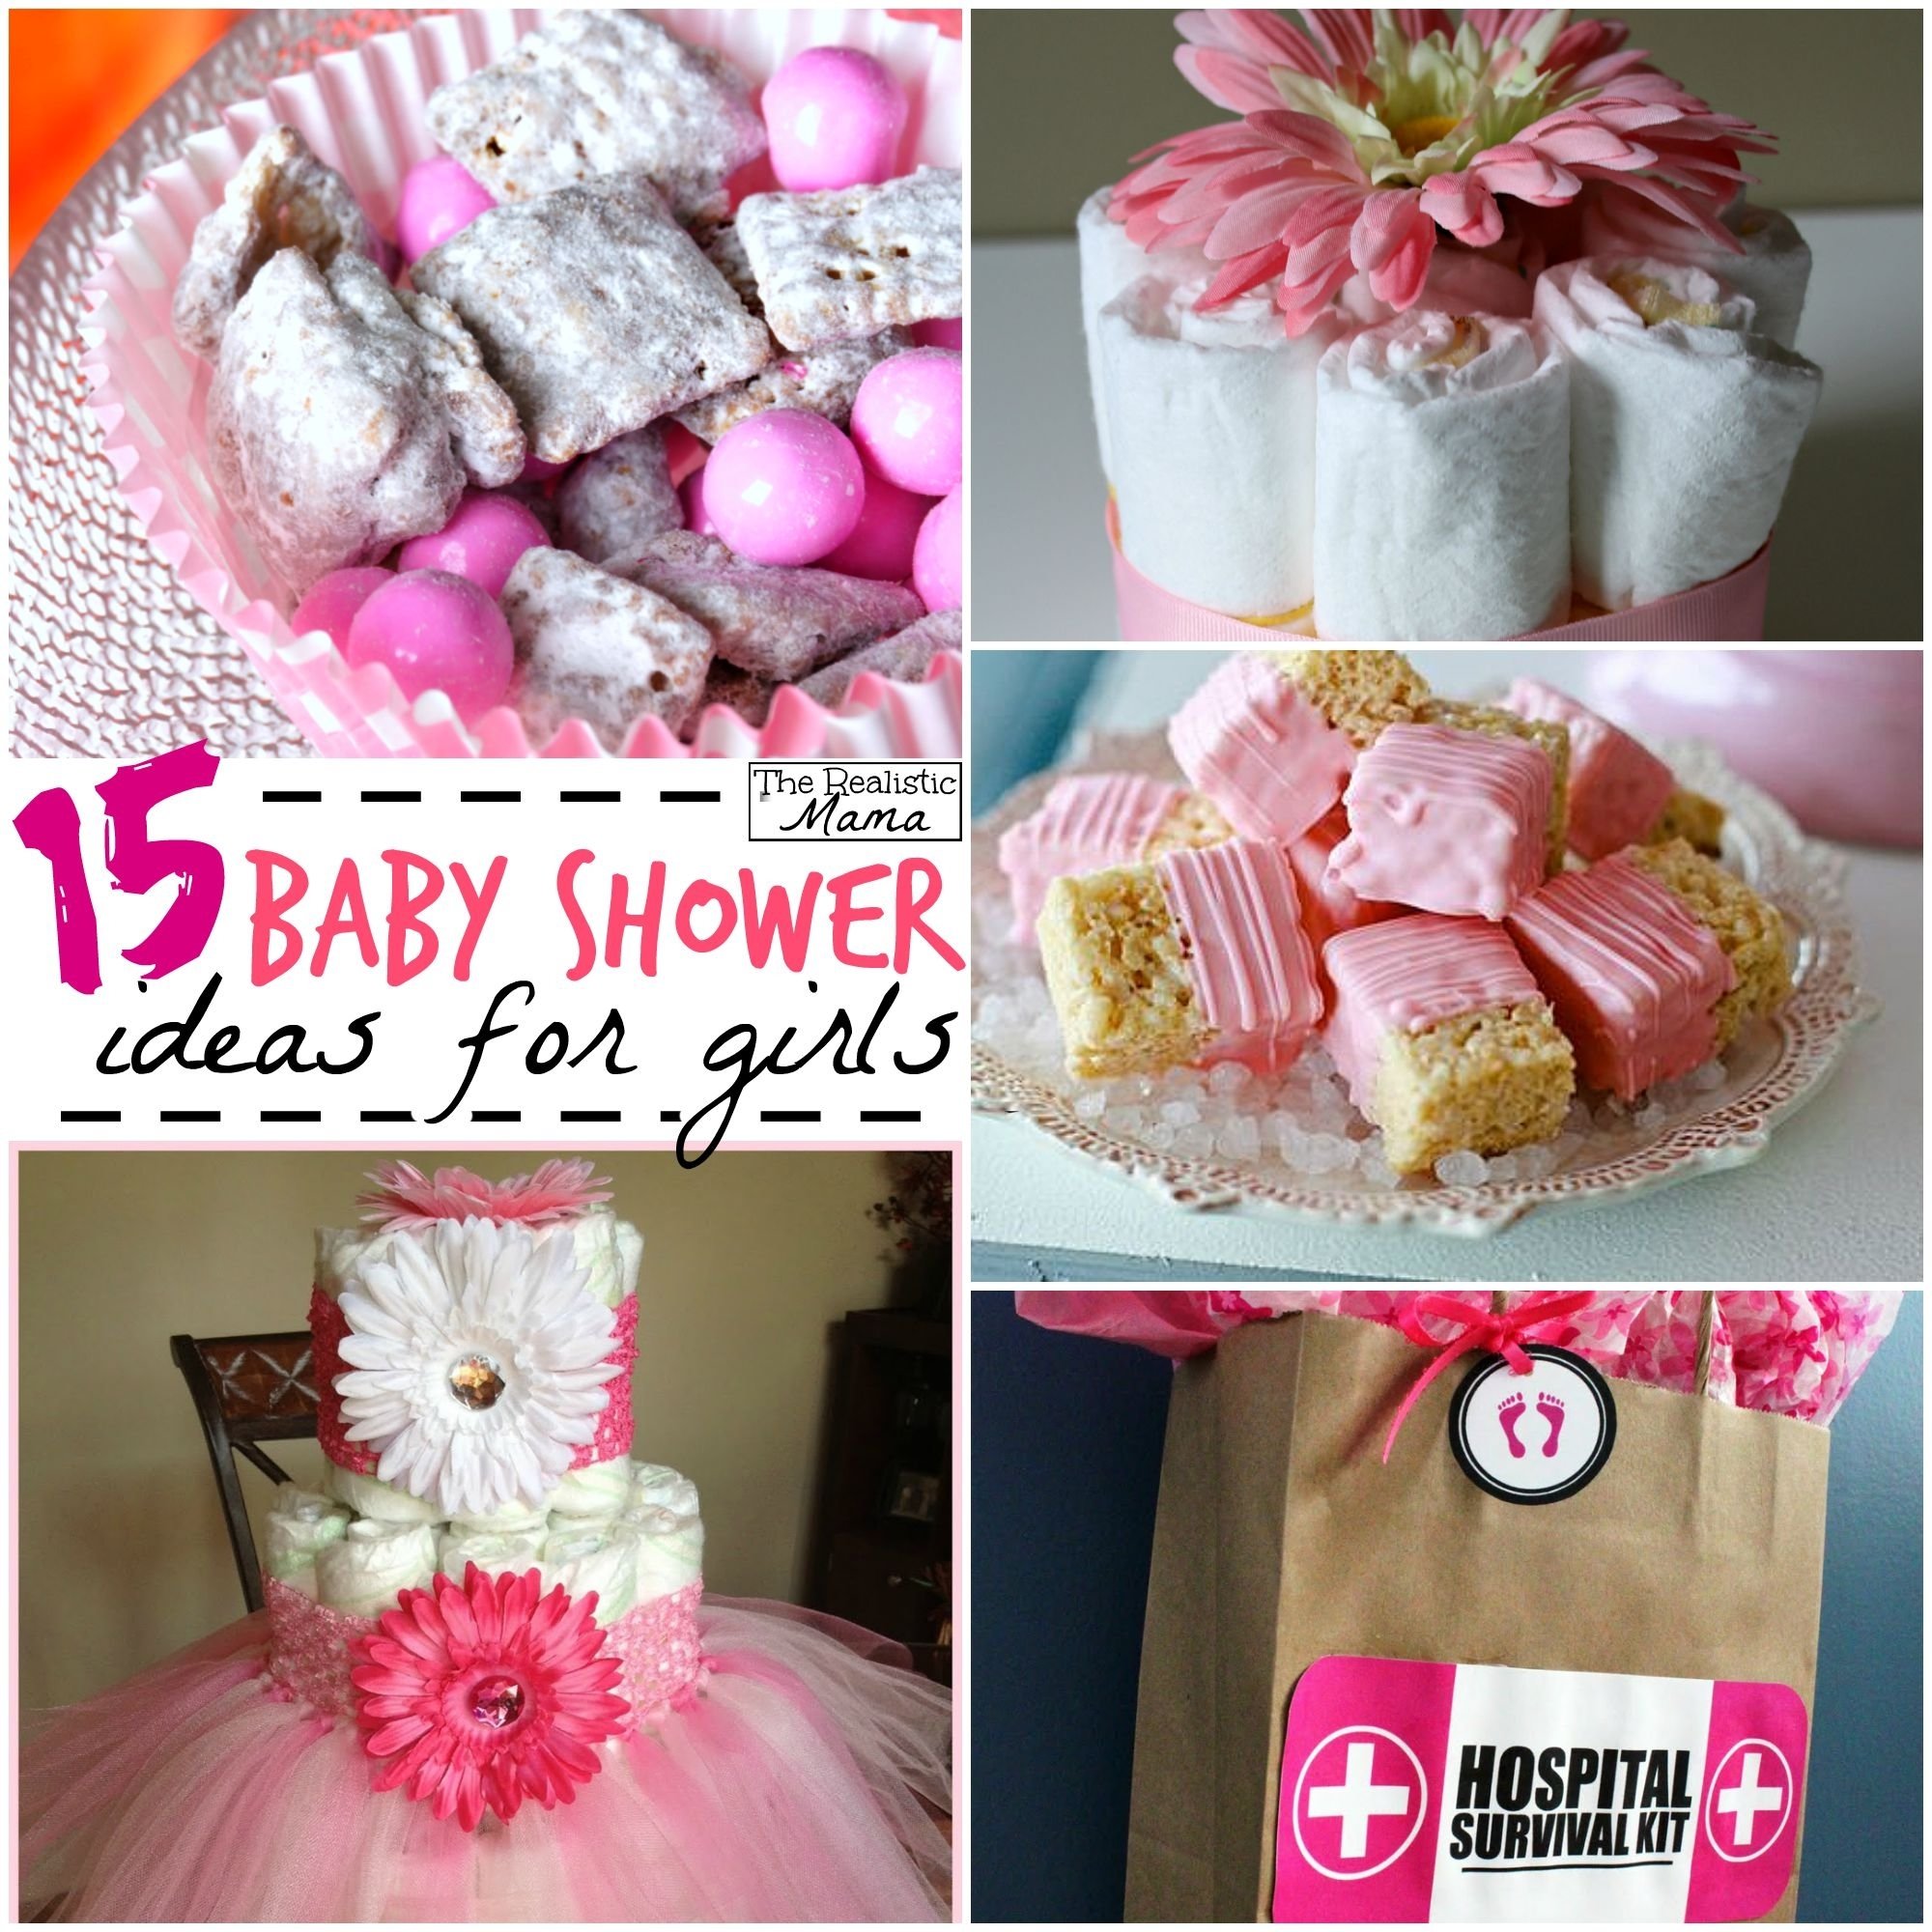 10 Attractive Gift Ideas For Baby Girl 15 baby shower ideas for girls the realistic mama 7 2023